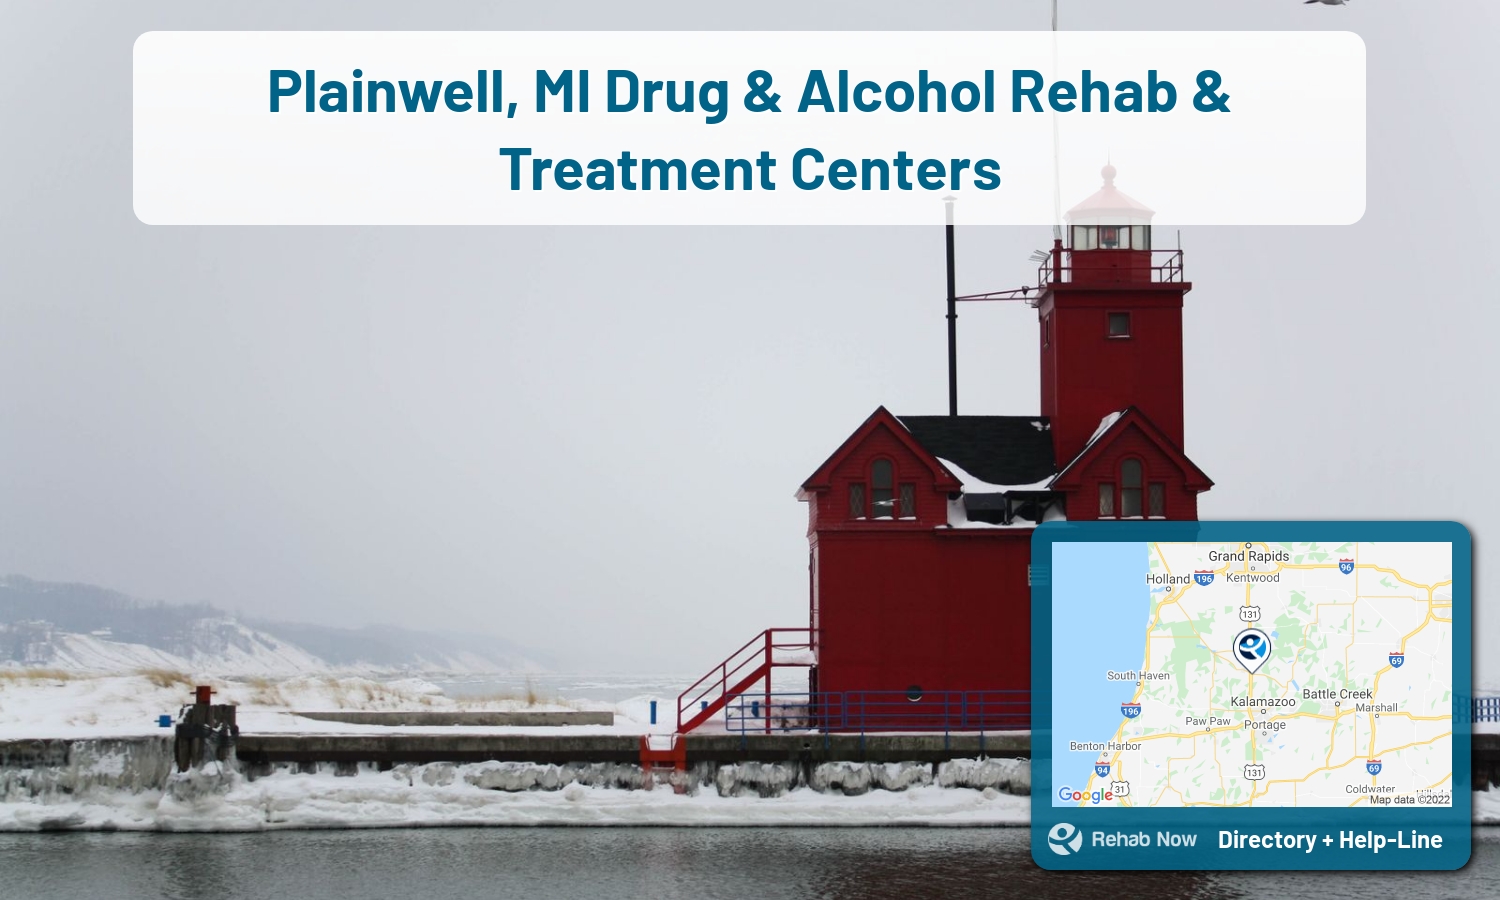 Plainwell, MI Treatment Centers. Find drug rehab in Plainwell, Michigan, or detox and treatment programs. Get the right help now!